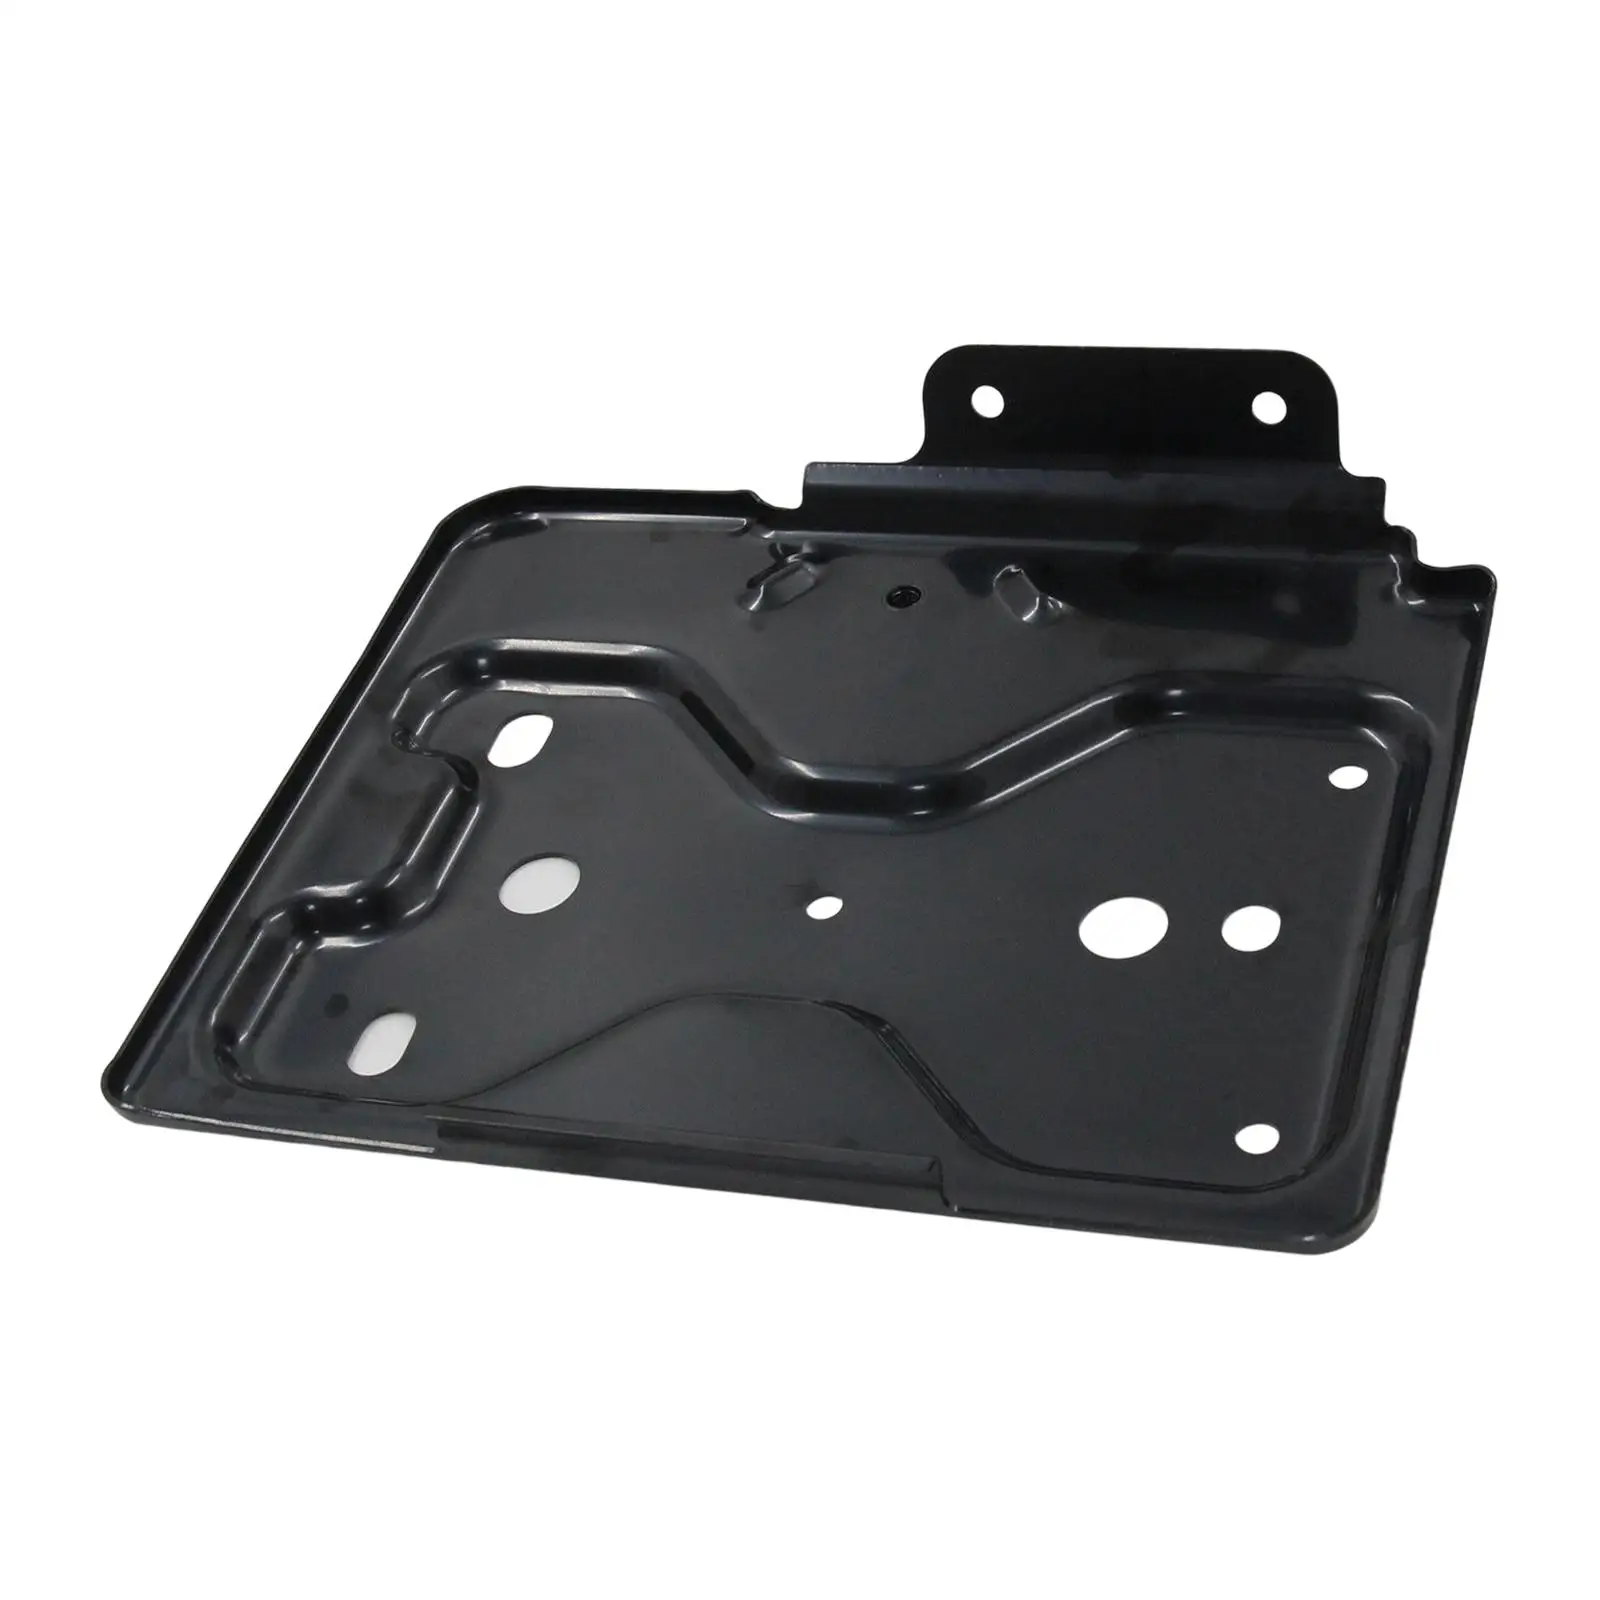 Driver Side Battery Tray Premium Durable Easy to Install Spare Parts Replaces Car Accessories for Chevrolet Silverado 1500